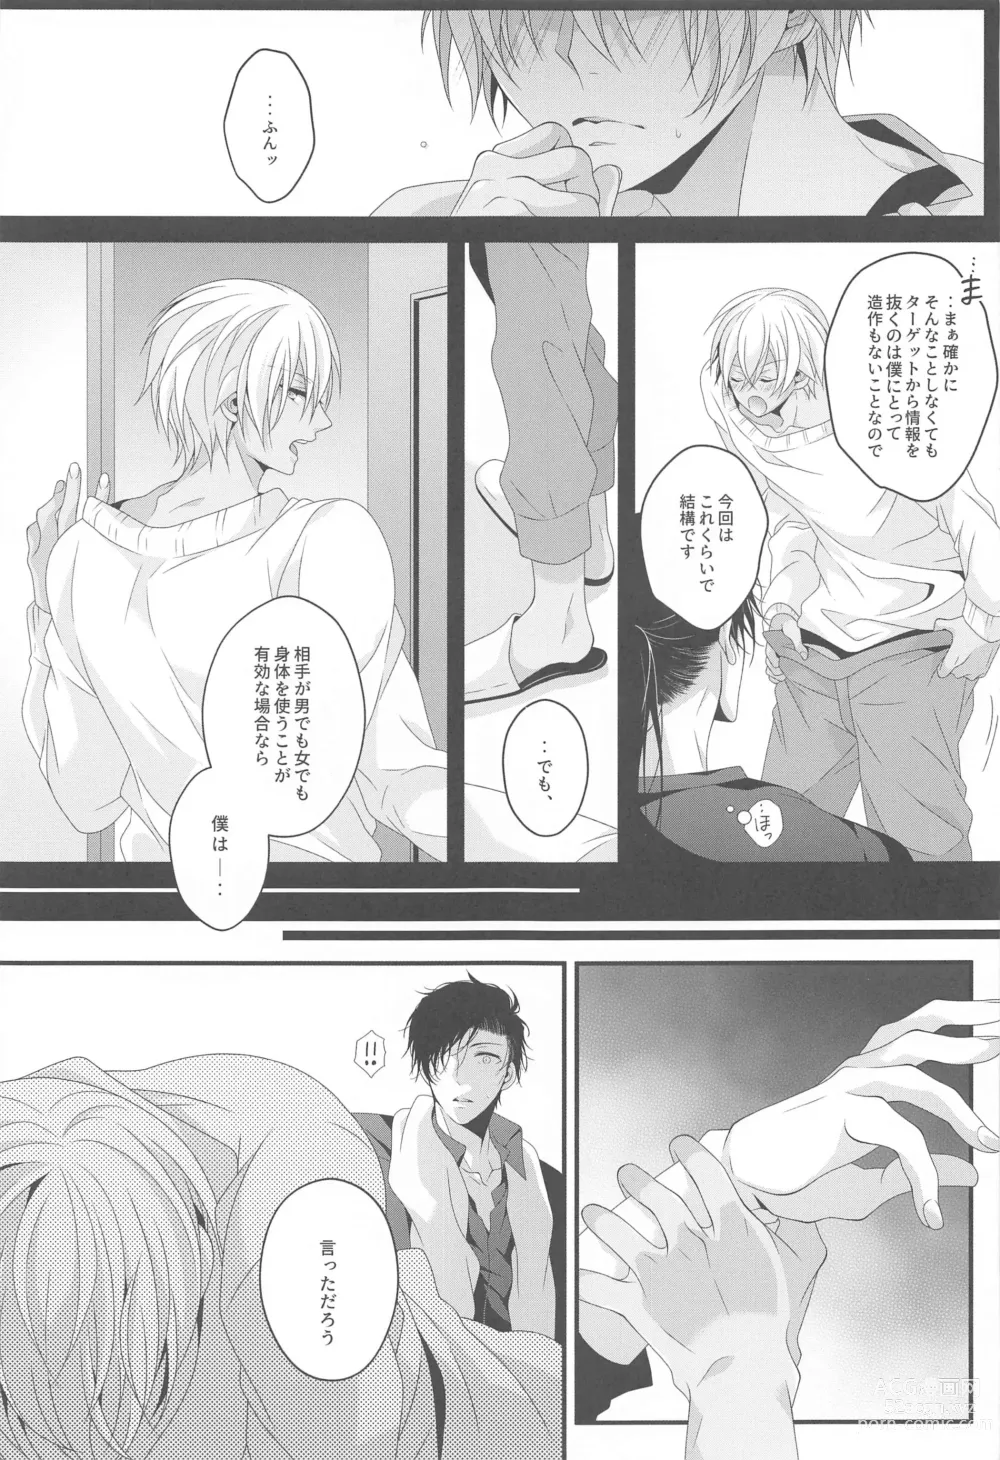 Page 14 of doujinshi Aibetsuriku no Yosame - A rainy night the pain of separation from loved ones